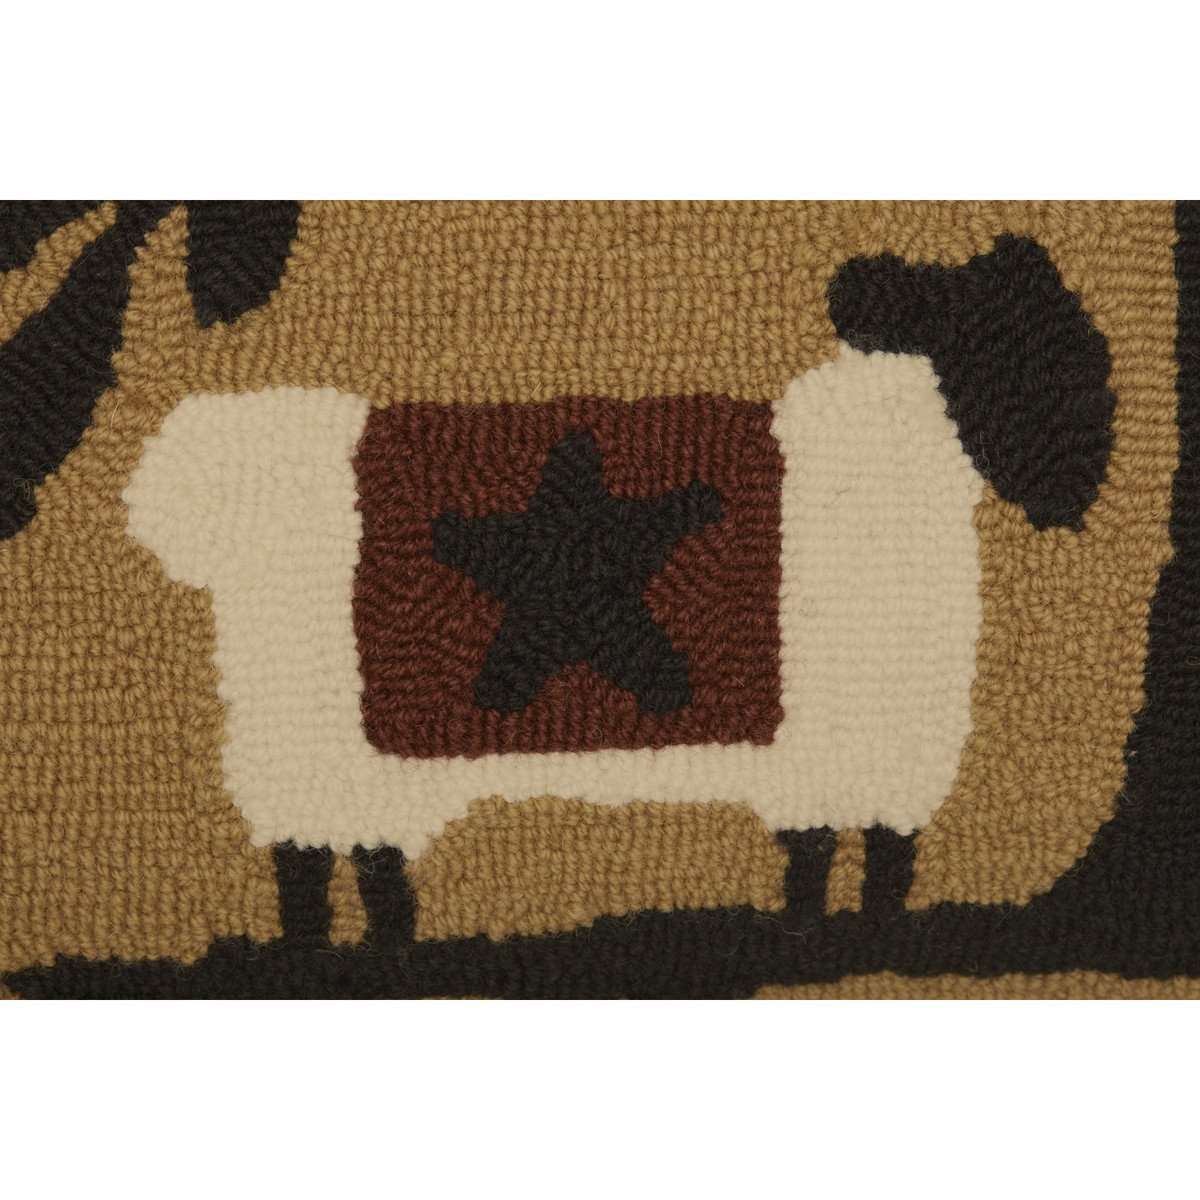 Heritage Farms Sheep and Star Hooked Pillow 14"x22" - The Fox Decor